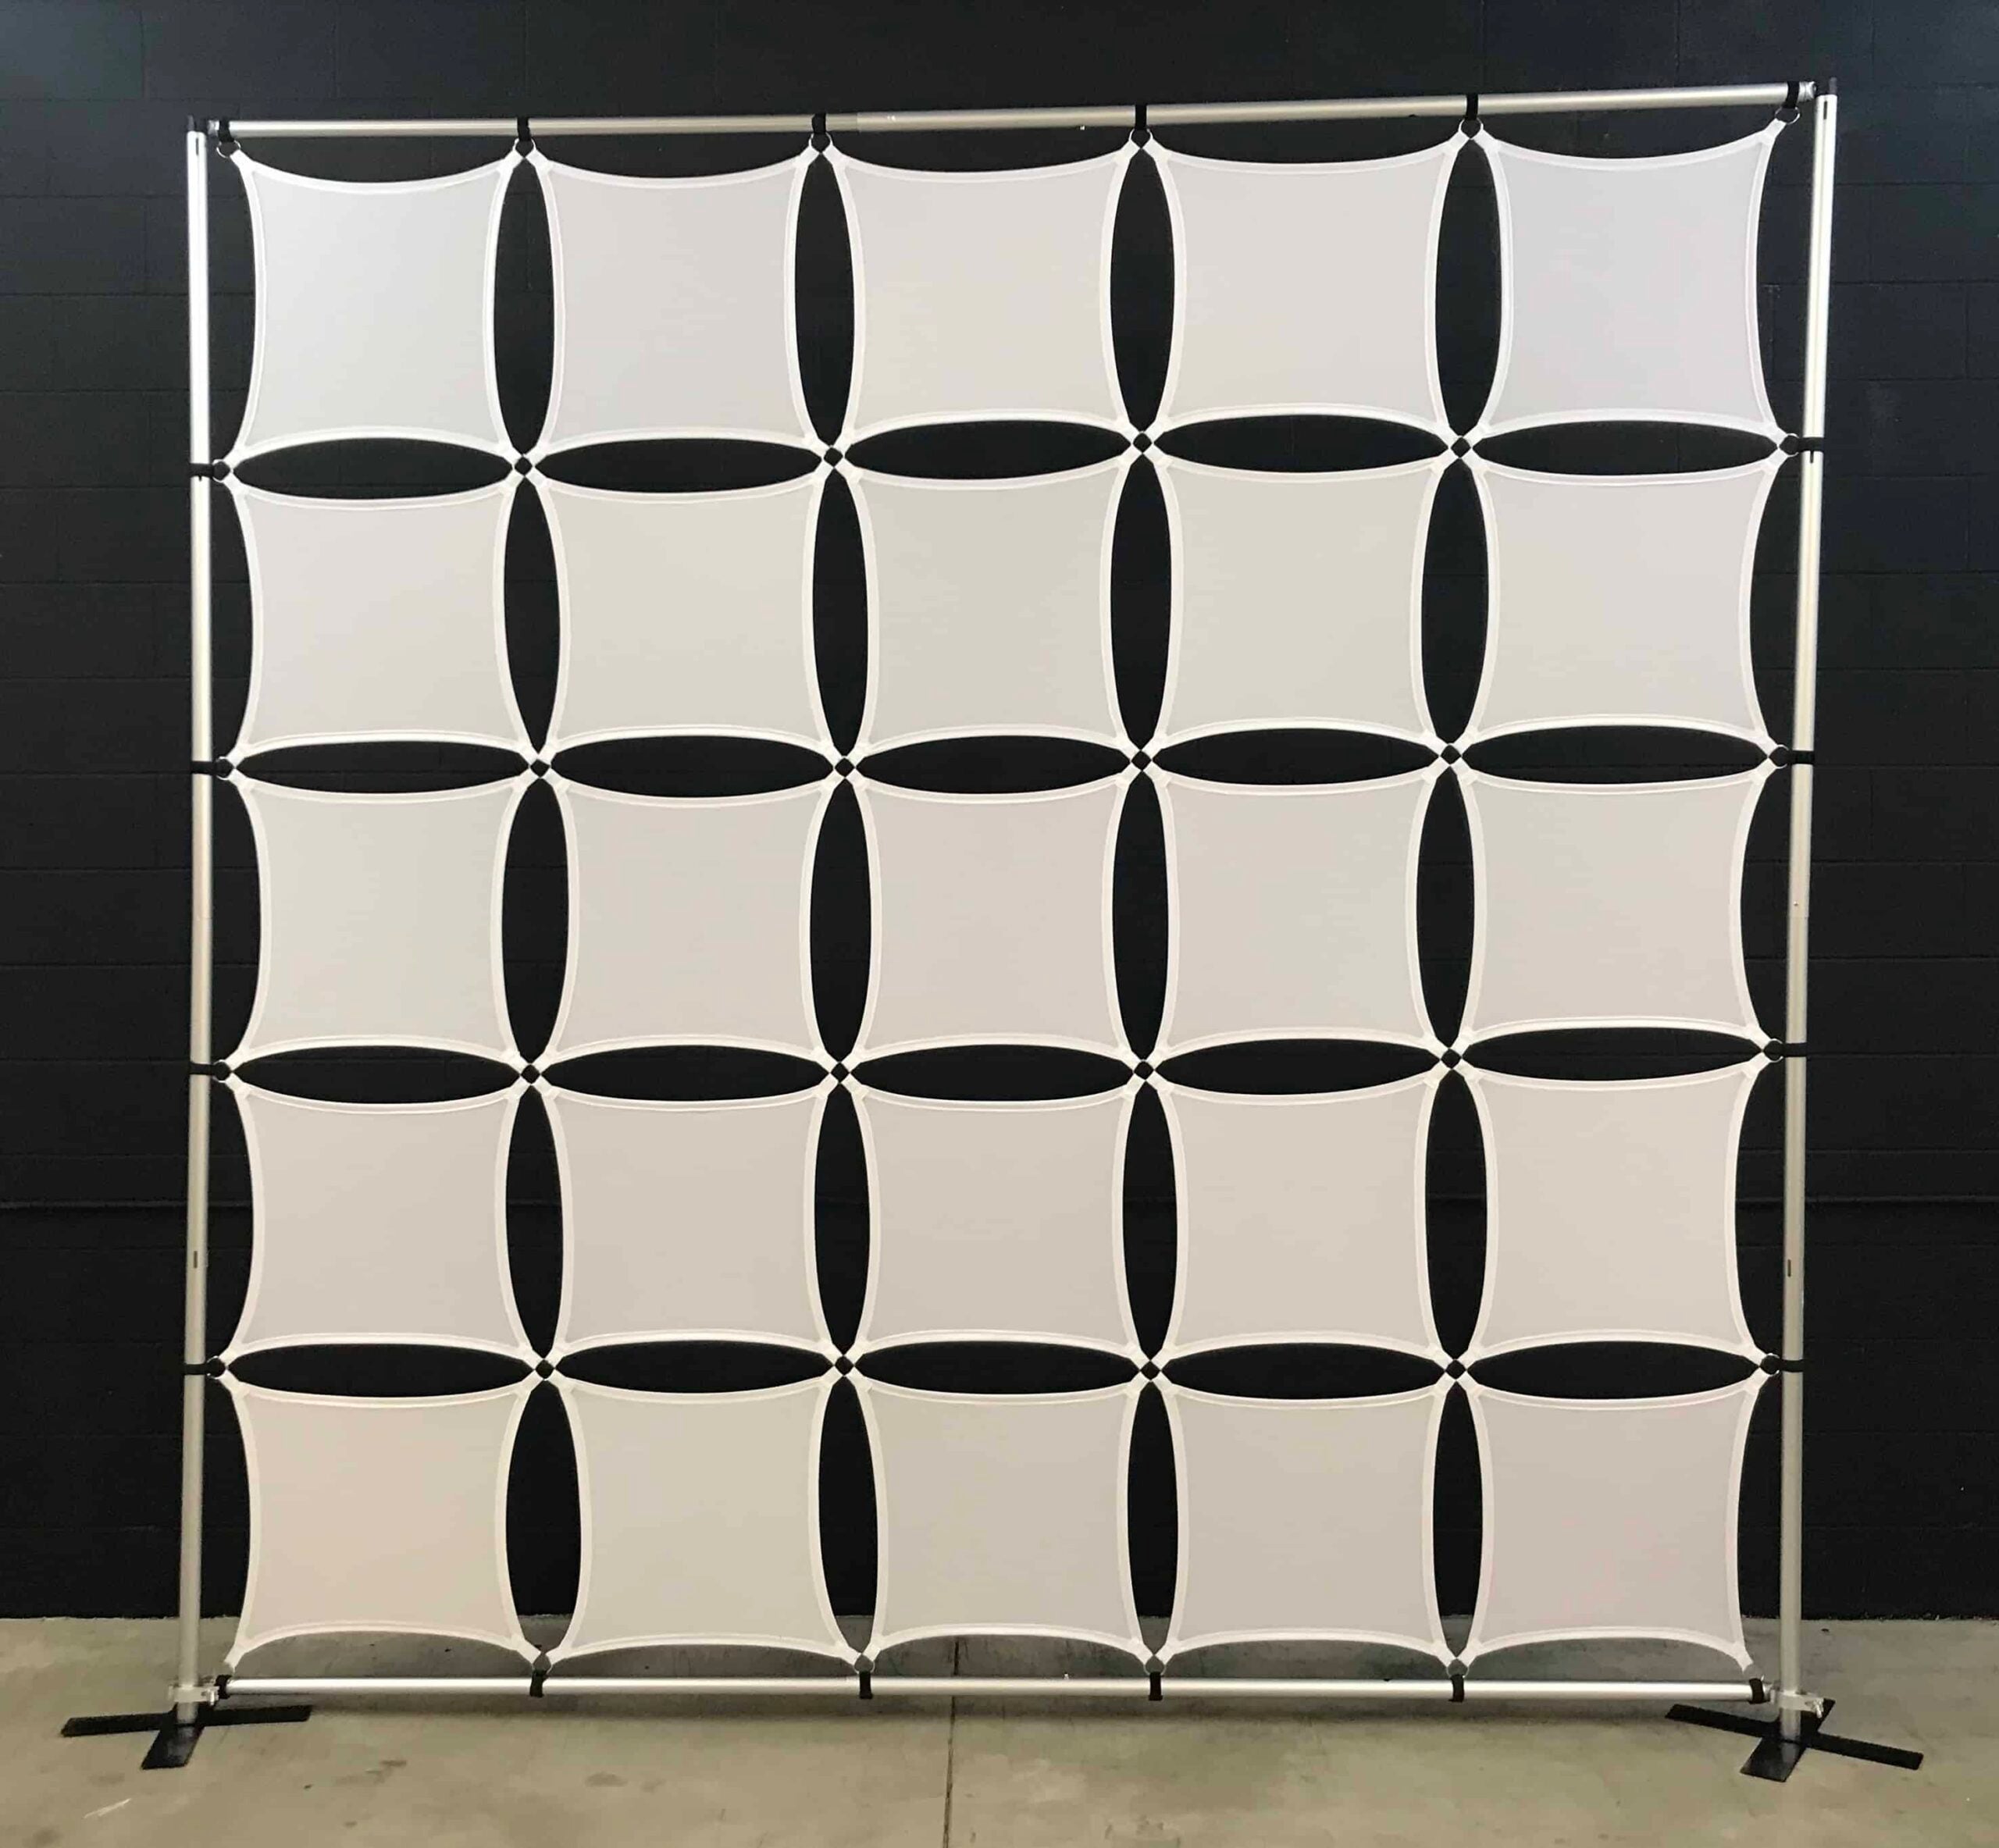 10x10 Ft Square Panel Wall - With Frame - StretchyScreens